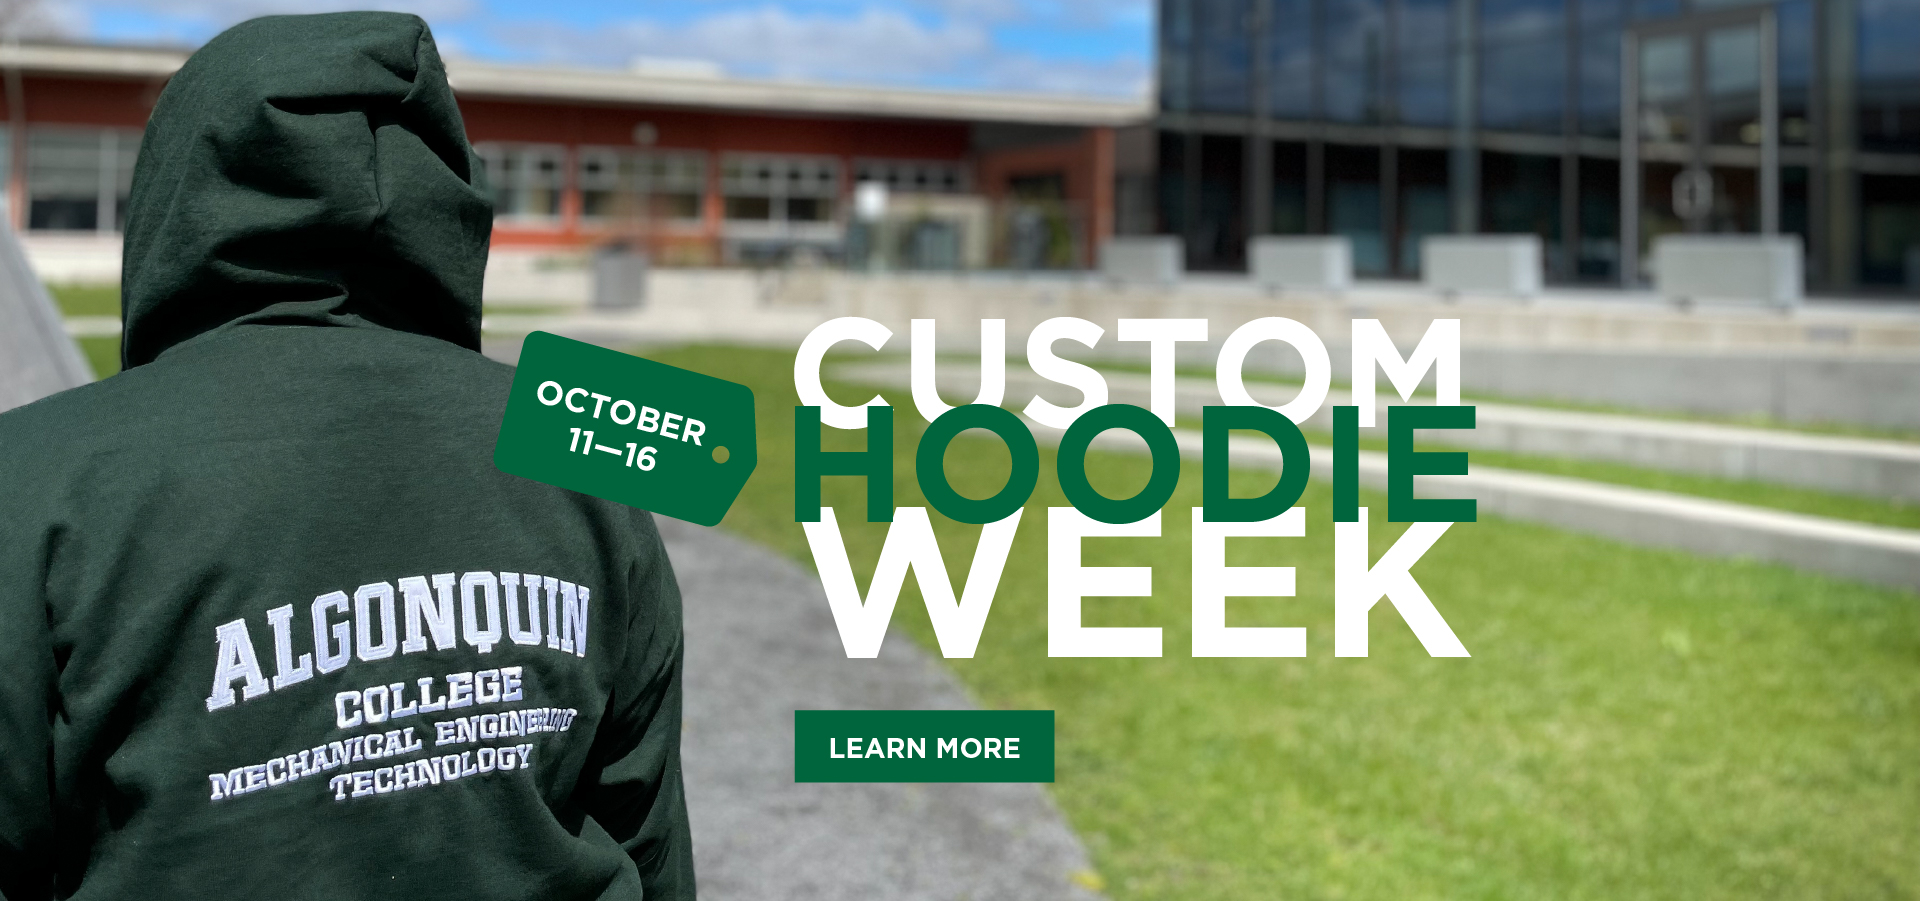 Image: student in green Algonquin College Mechanical Engineering hoodie standing in the courtyard at Ottawa Campus. Text: Custom Hoodie Week is October 11 - 16. Click for more Information ->